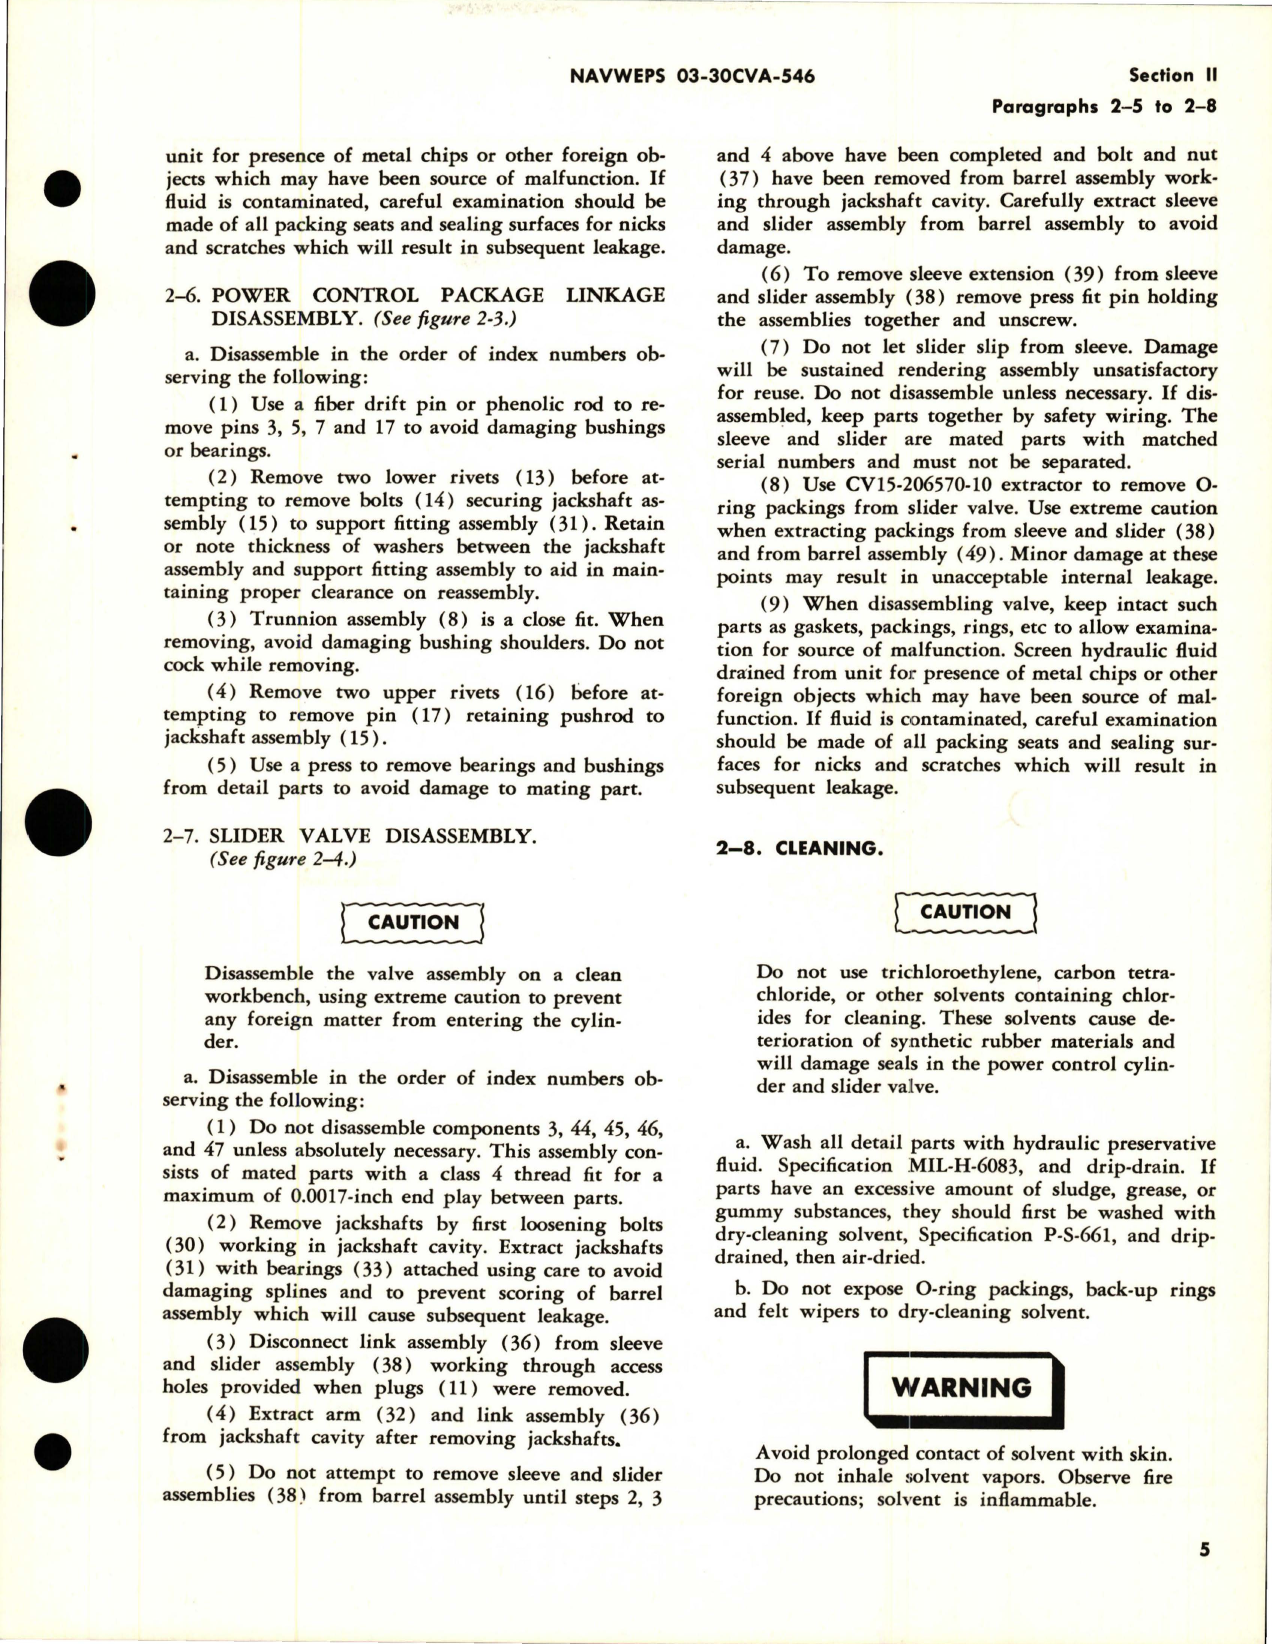 Sample page 9 from AirCorps Library document: Overhaul Instructions for Rudder Control, Cylinder Assy, Valve Assy, Rigging Fixtures, Synchronization Fixture